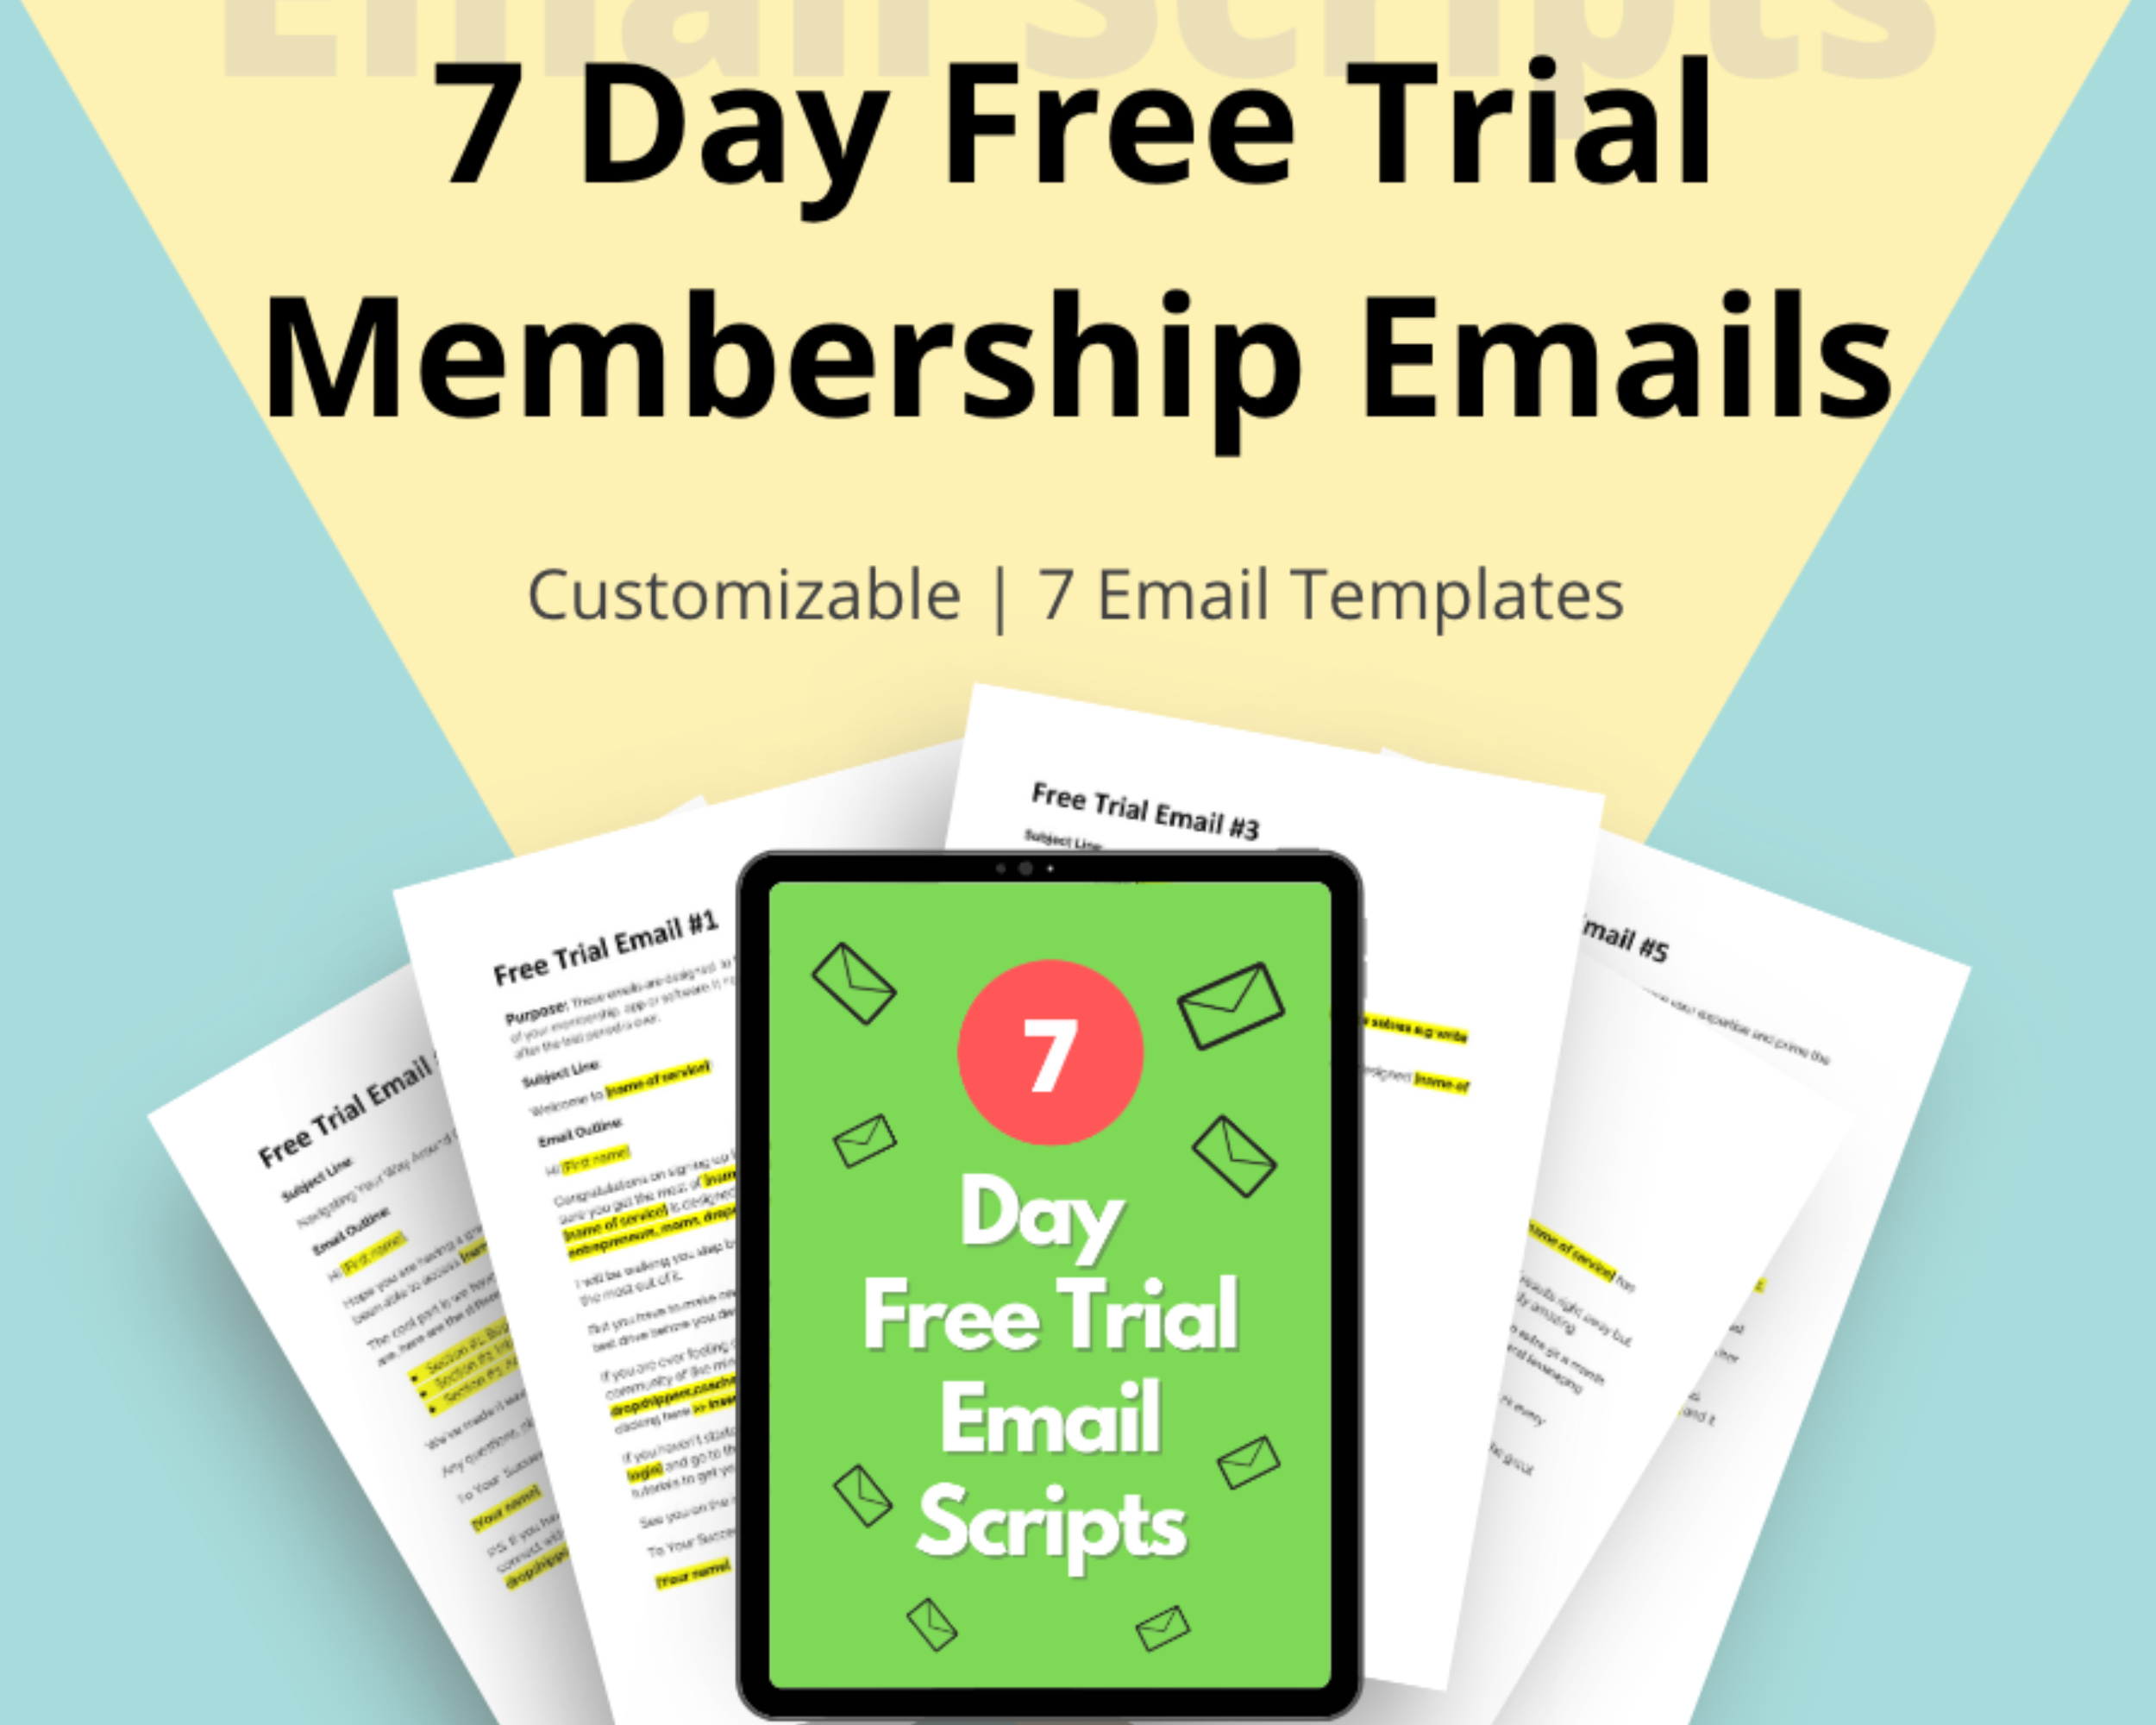 Free Trial Email Sequence | 7 Day Free Trial Membership Email Sequence